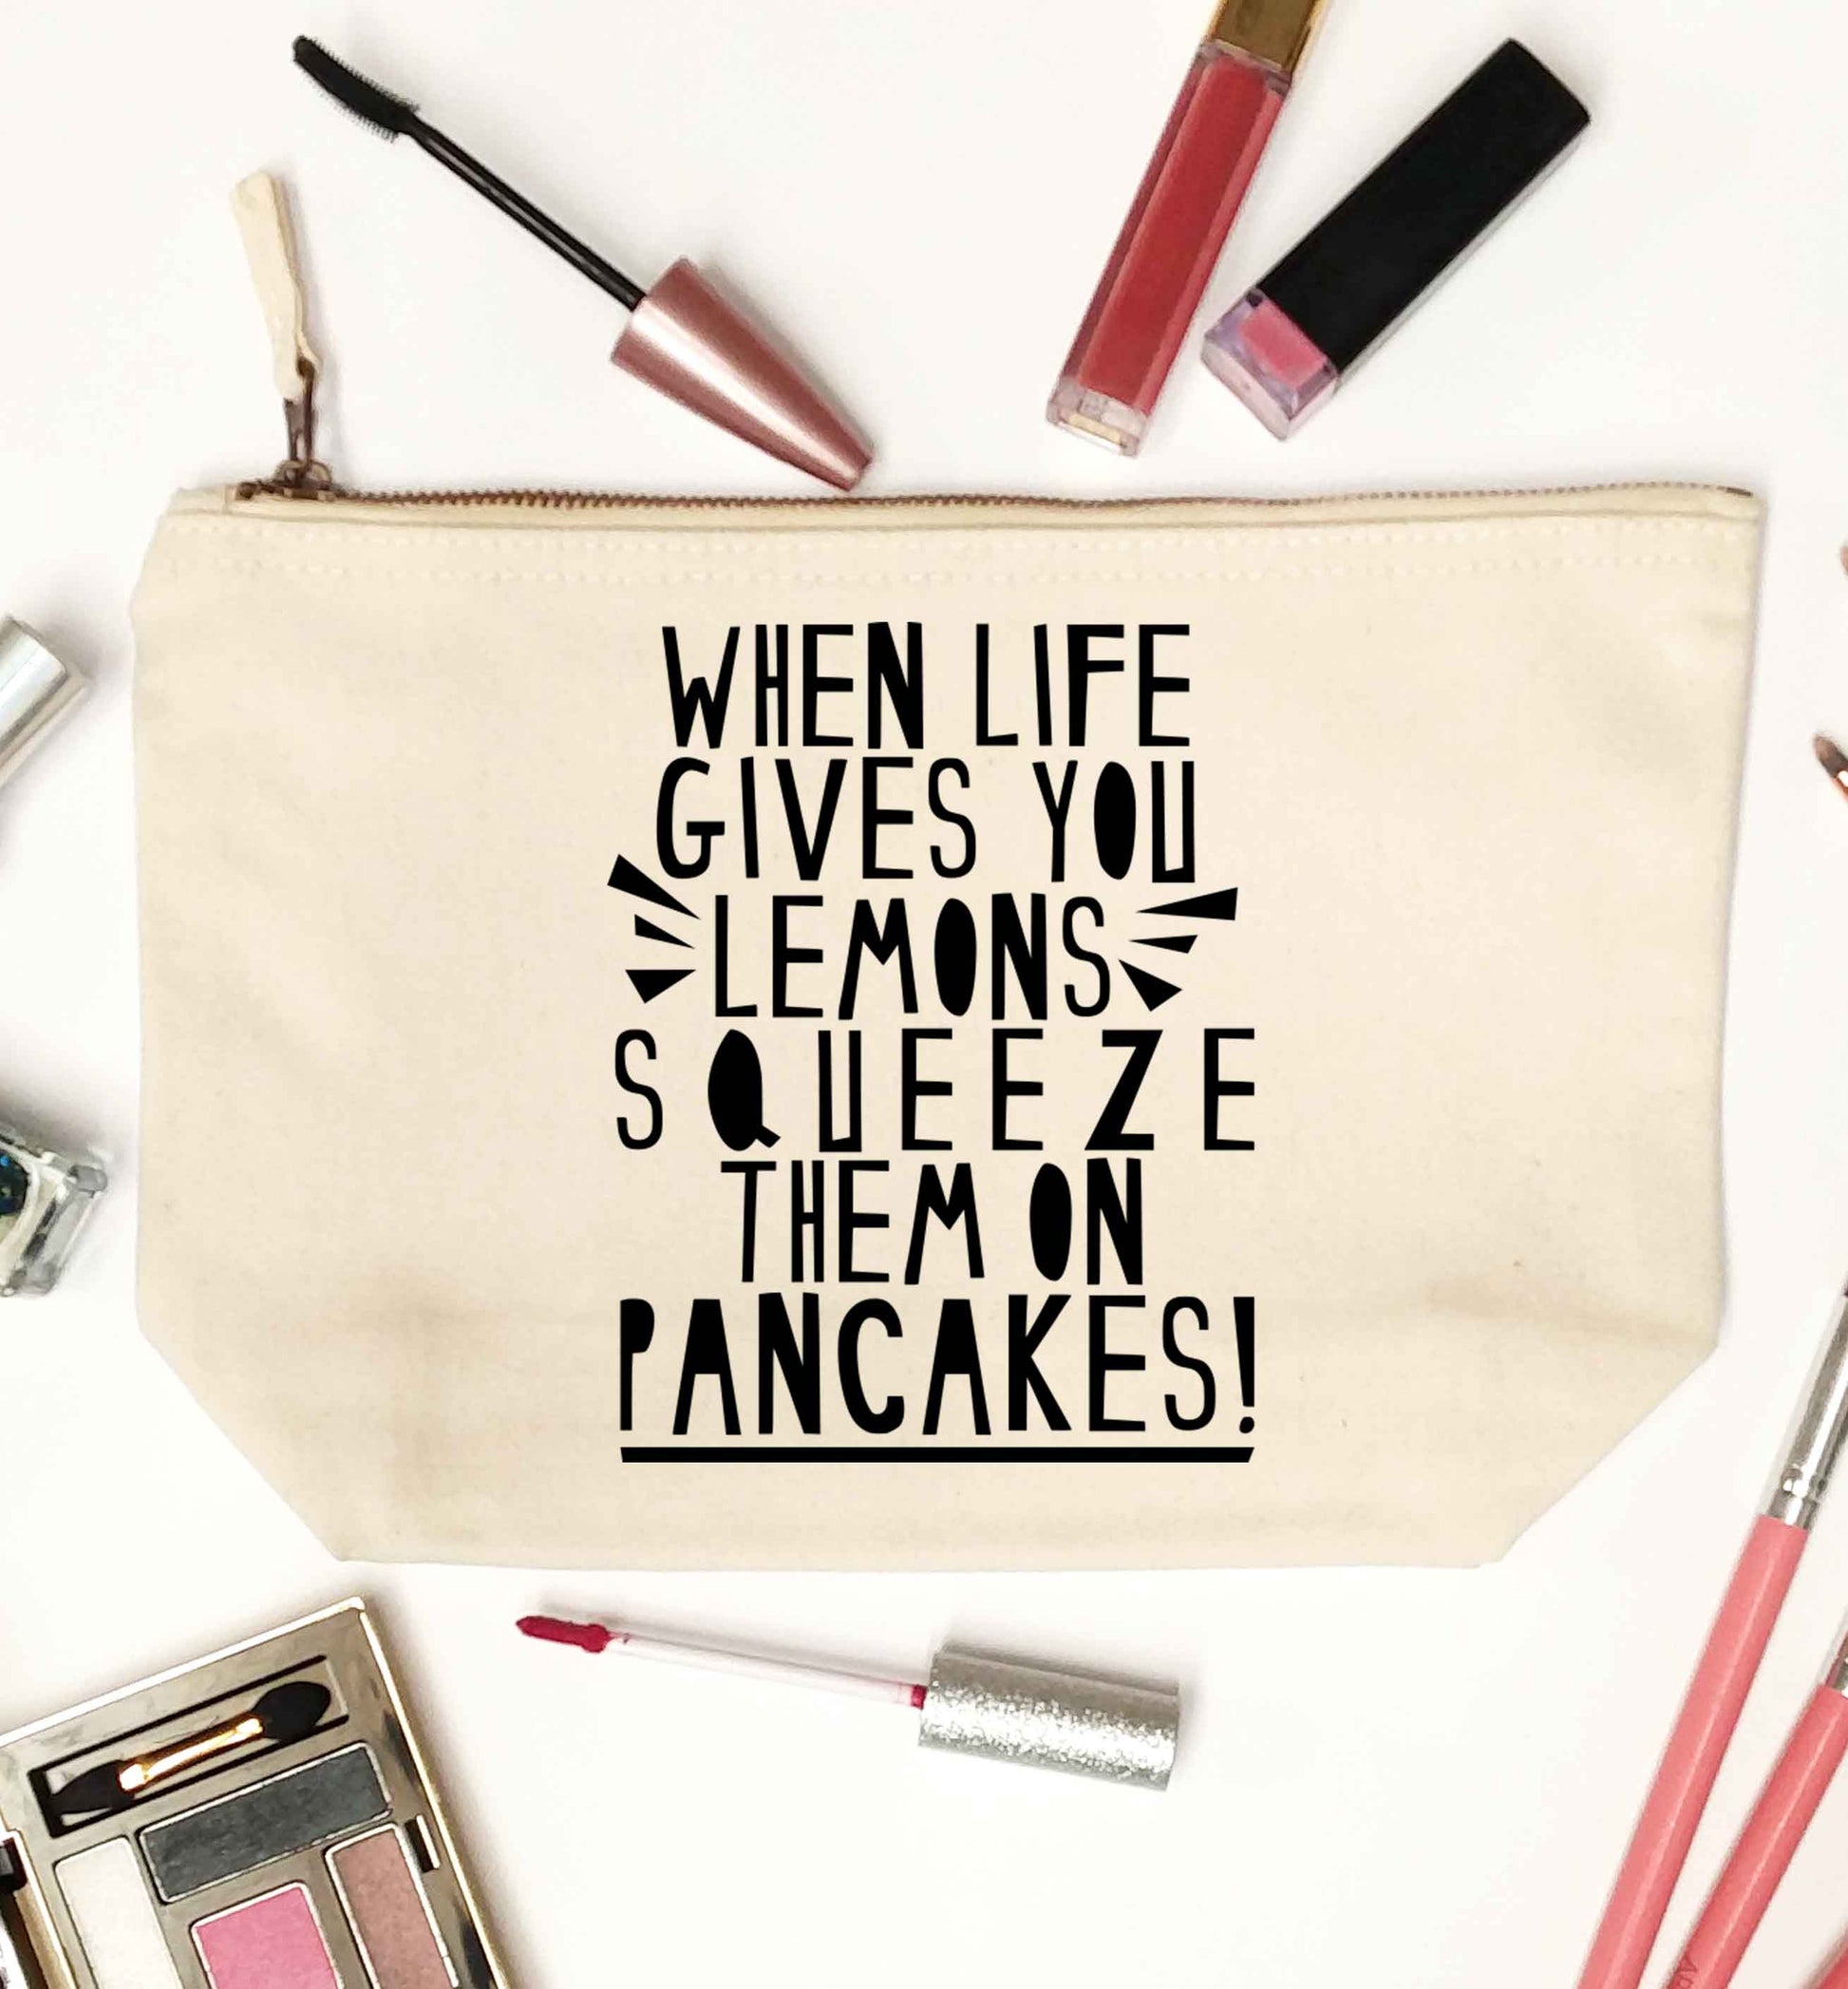 When life gives you lemons squeeze them on pancakes! natural makeup bag